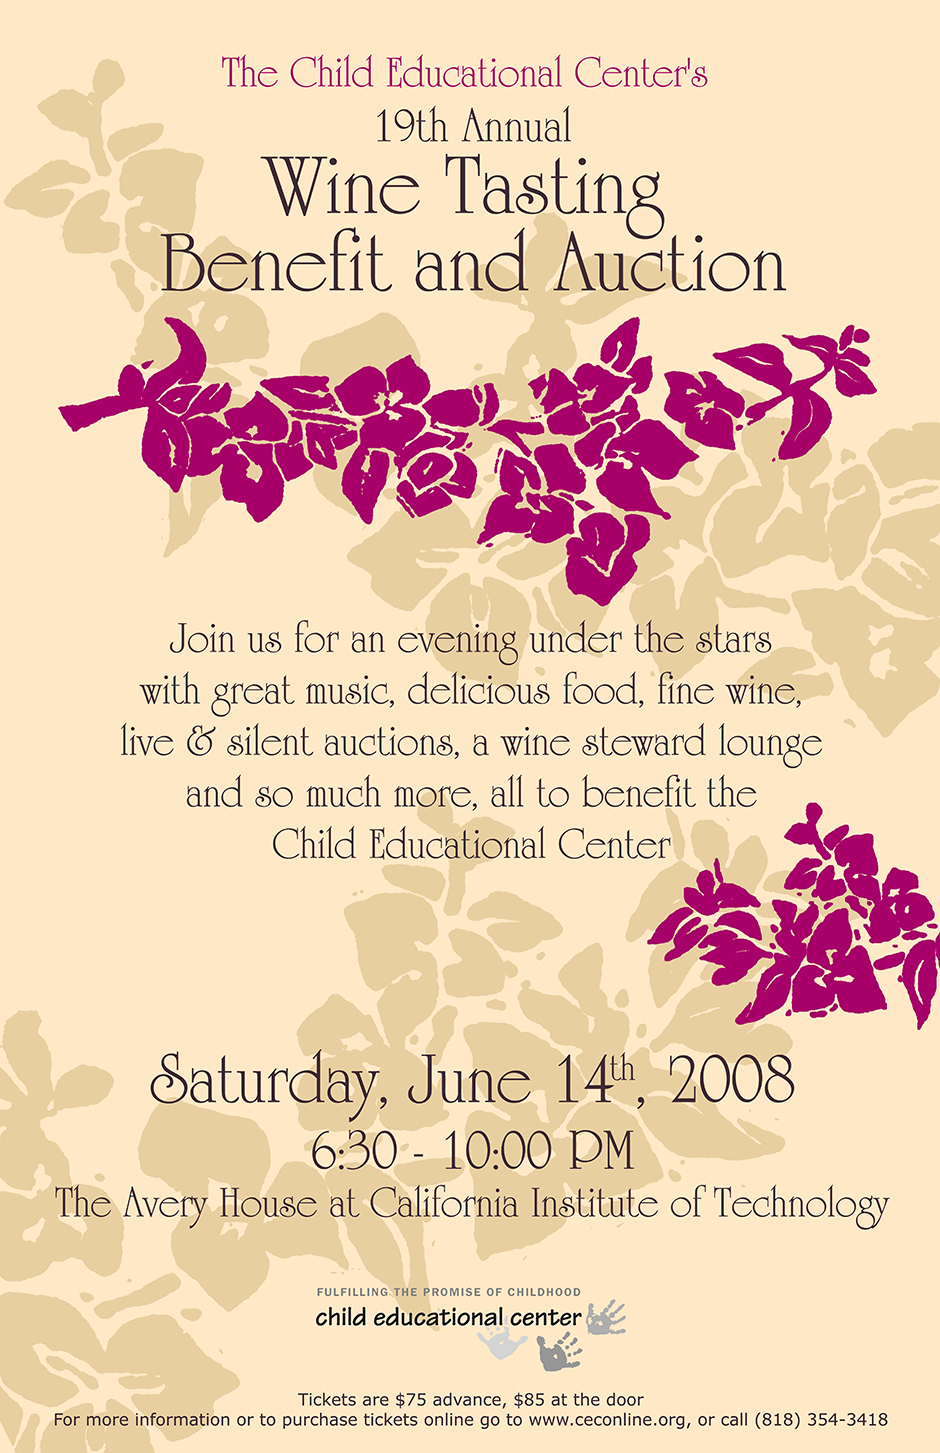 Poster design for the Child Educational Center's 19th Annual Wine Tasting Benefit & Auction